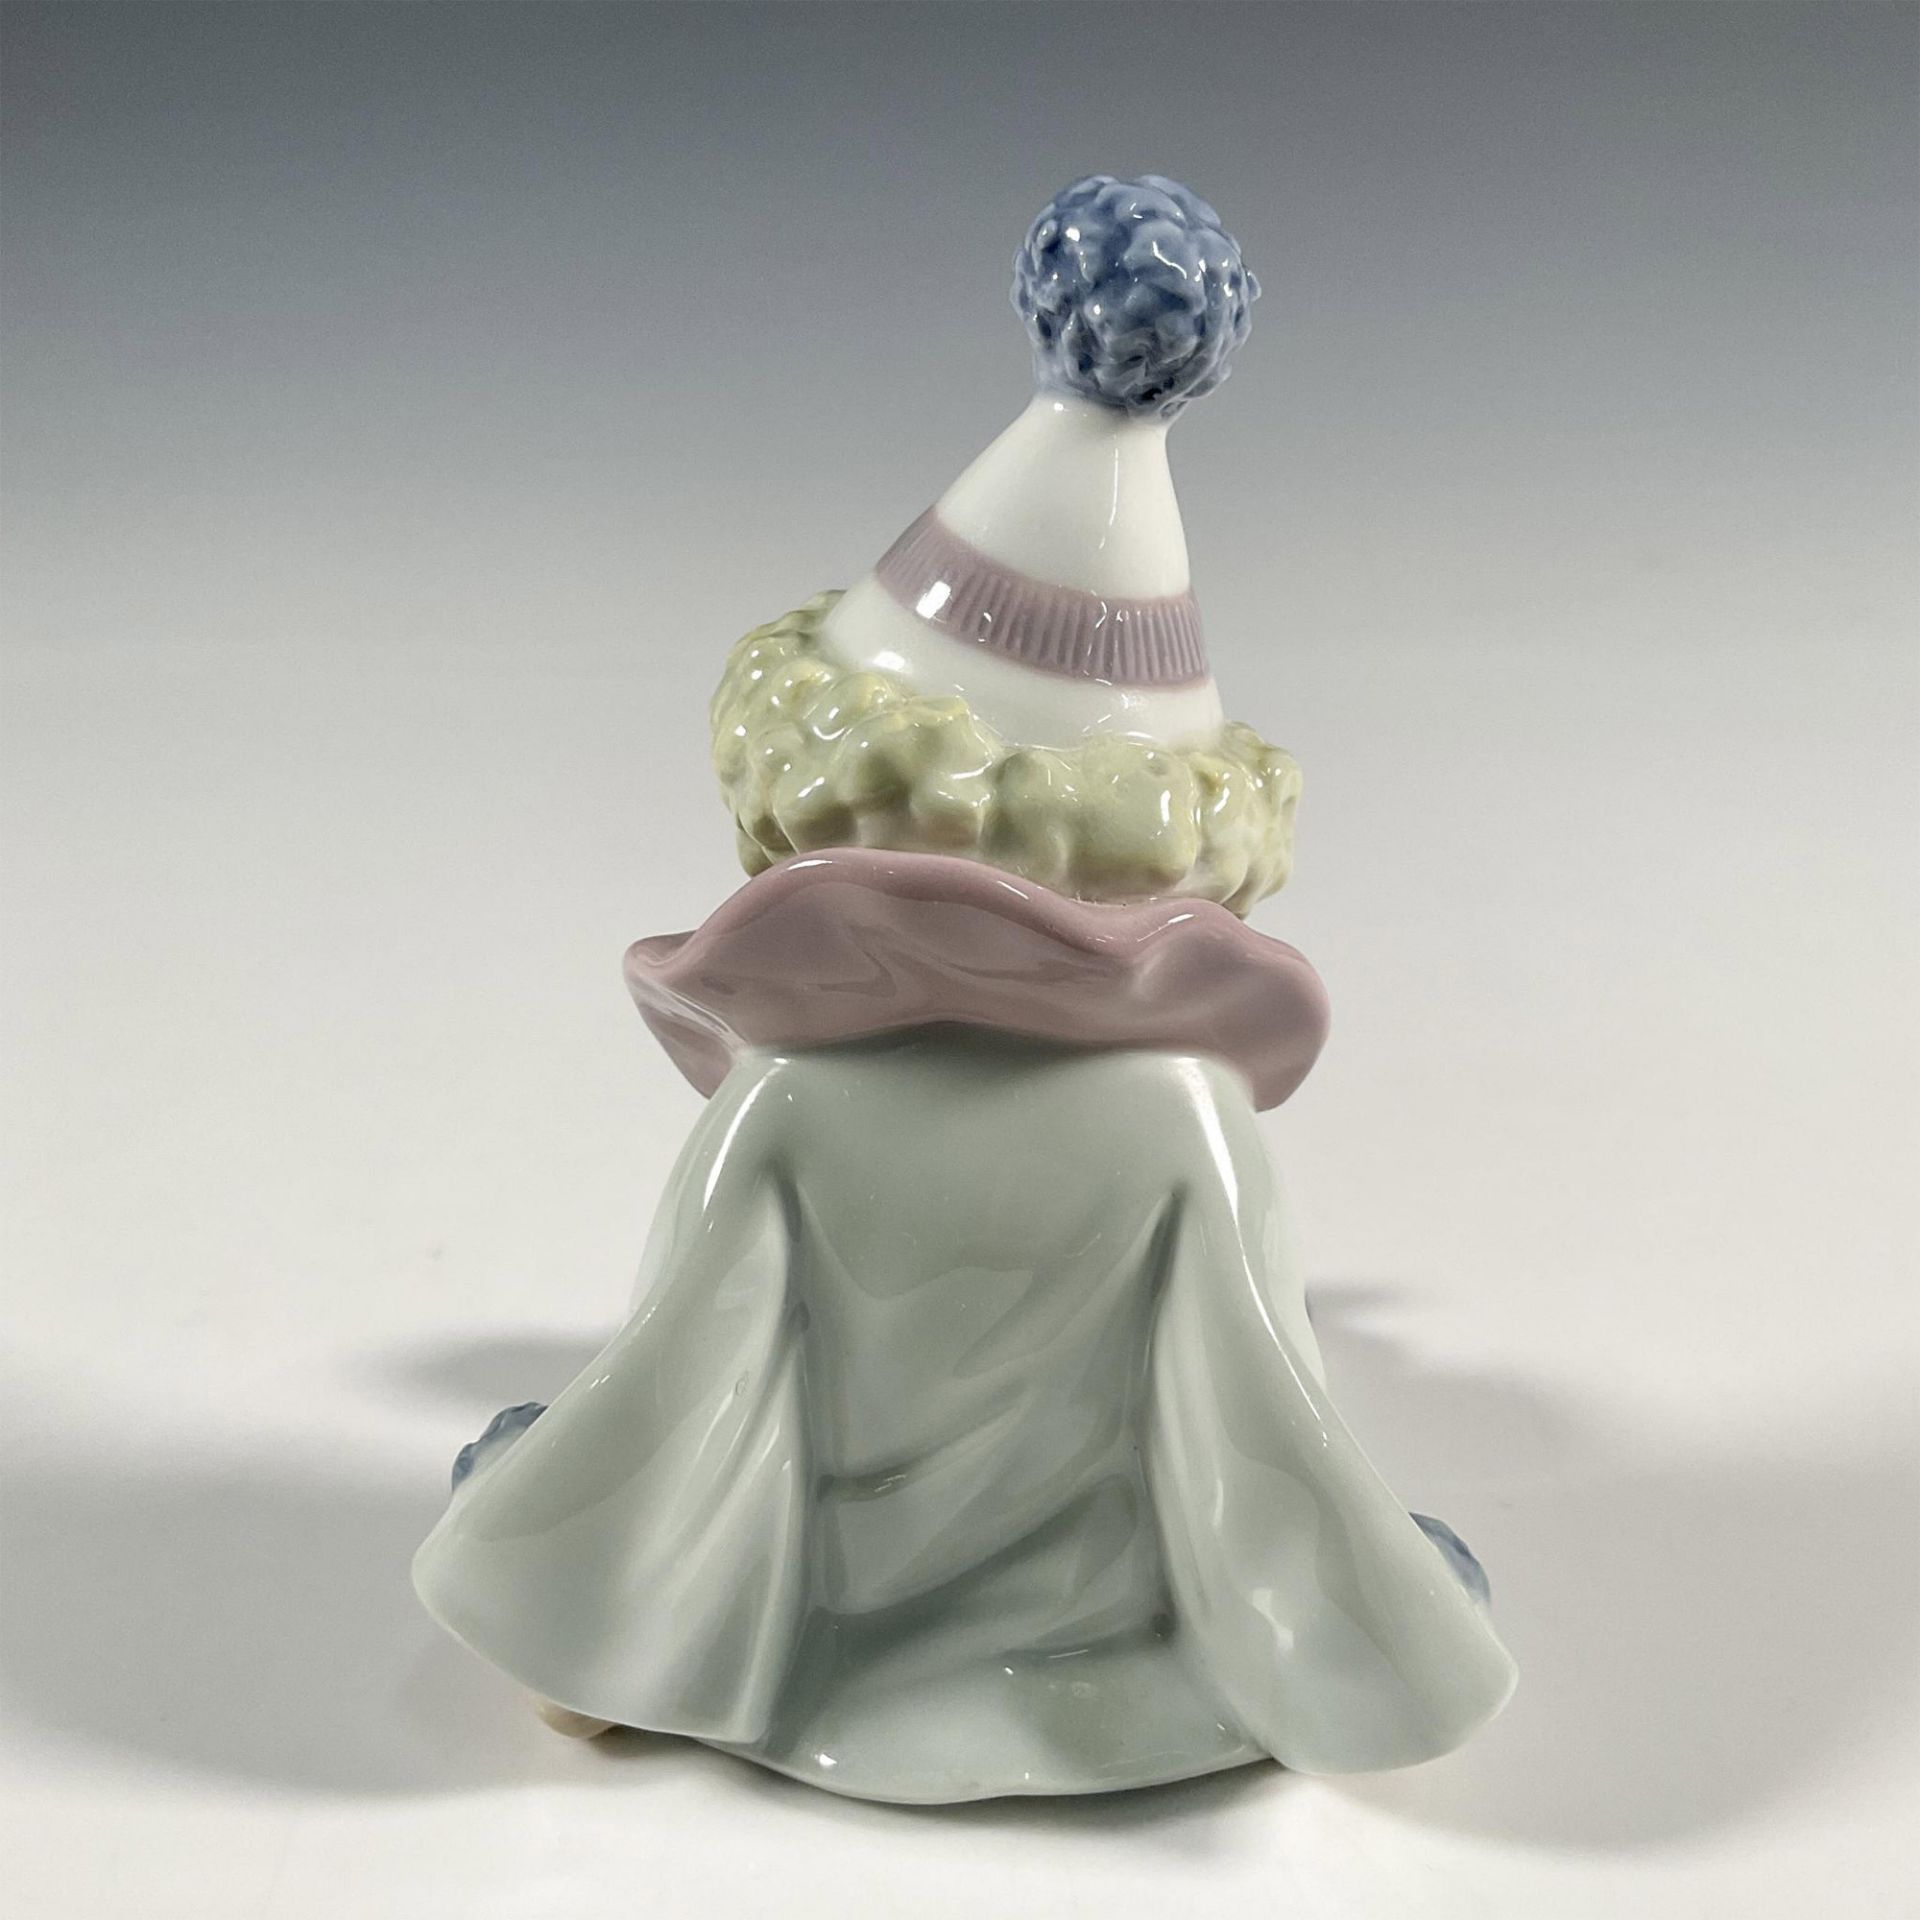 Lladro Porcelain Figurine, Pierrot with Puppy 1005277 - Image 2 of 3